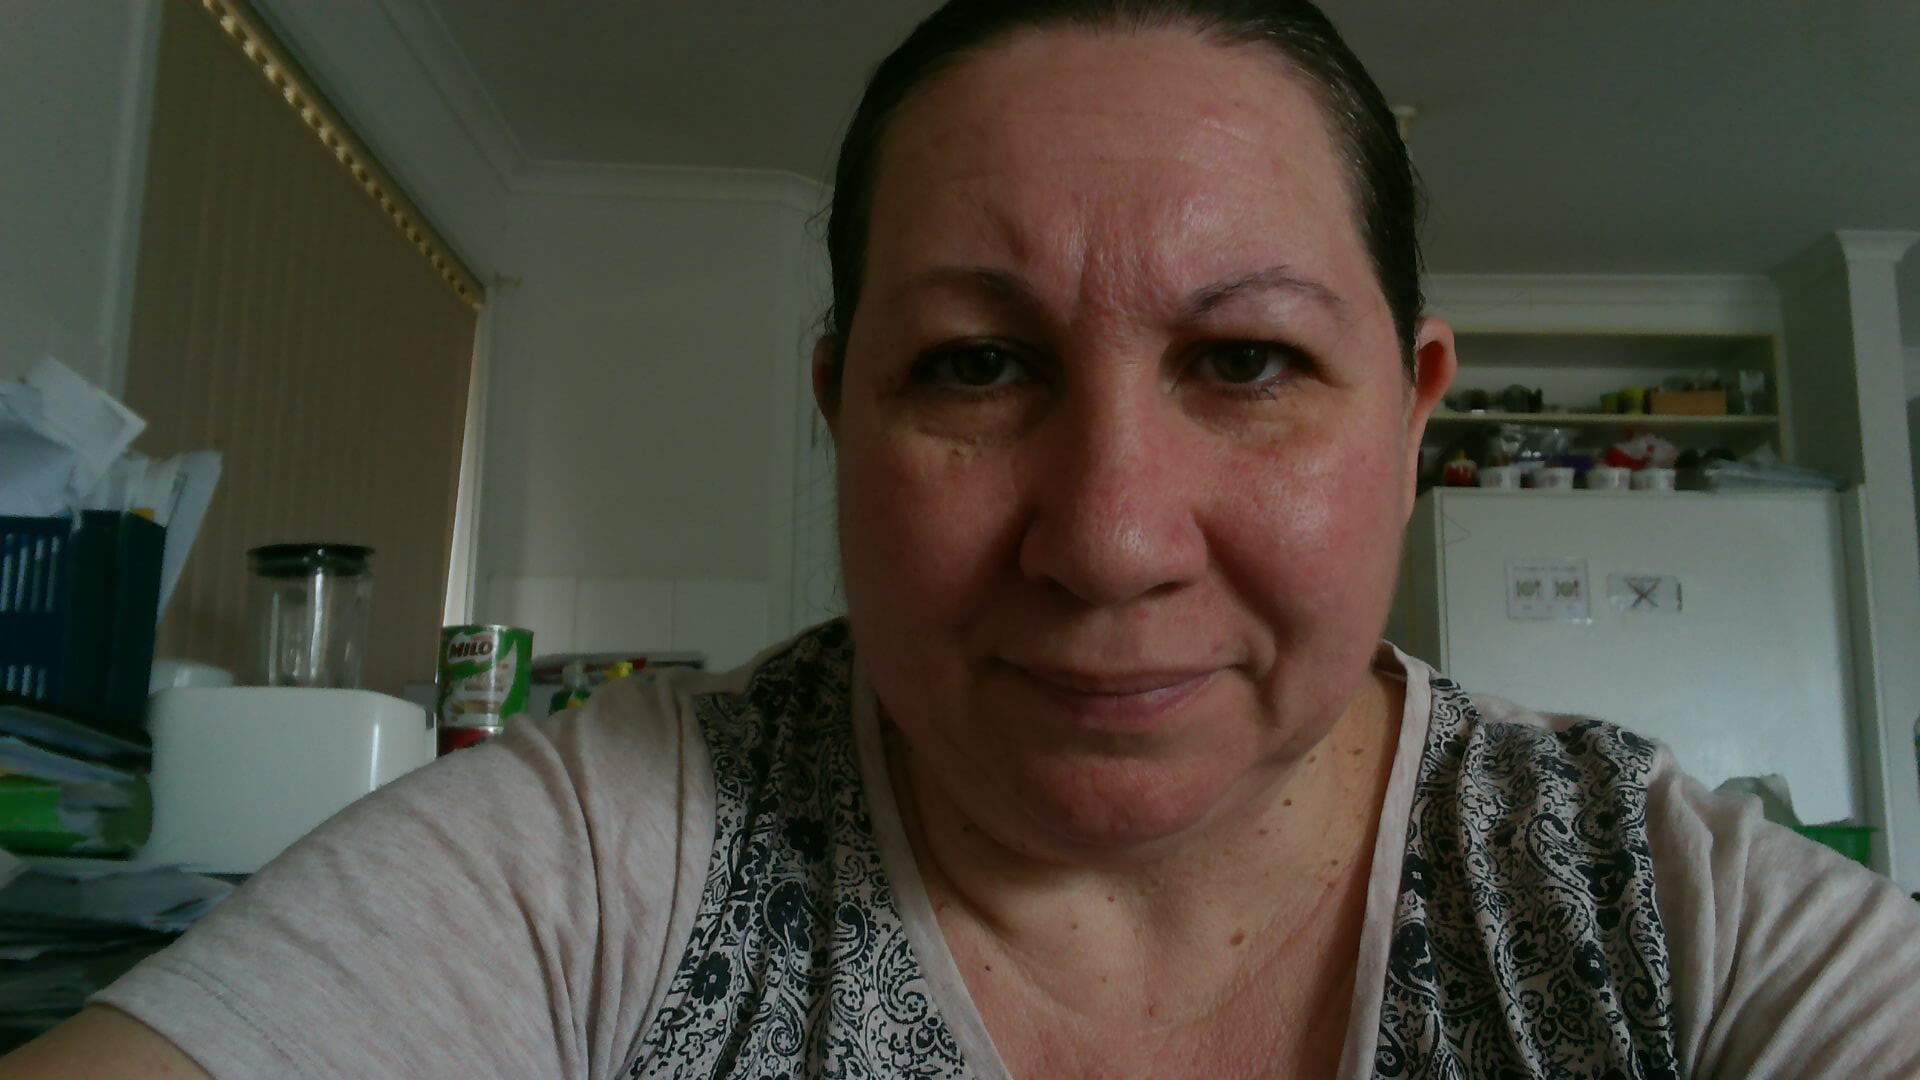 A selfie of Donna, with the background of a kitchen. She is a woman with dark hair tied back, wears a grey top with a black swirl pattern in the front, and is looking straight into the camera.